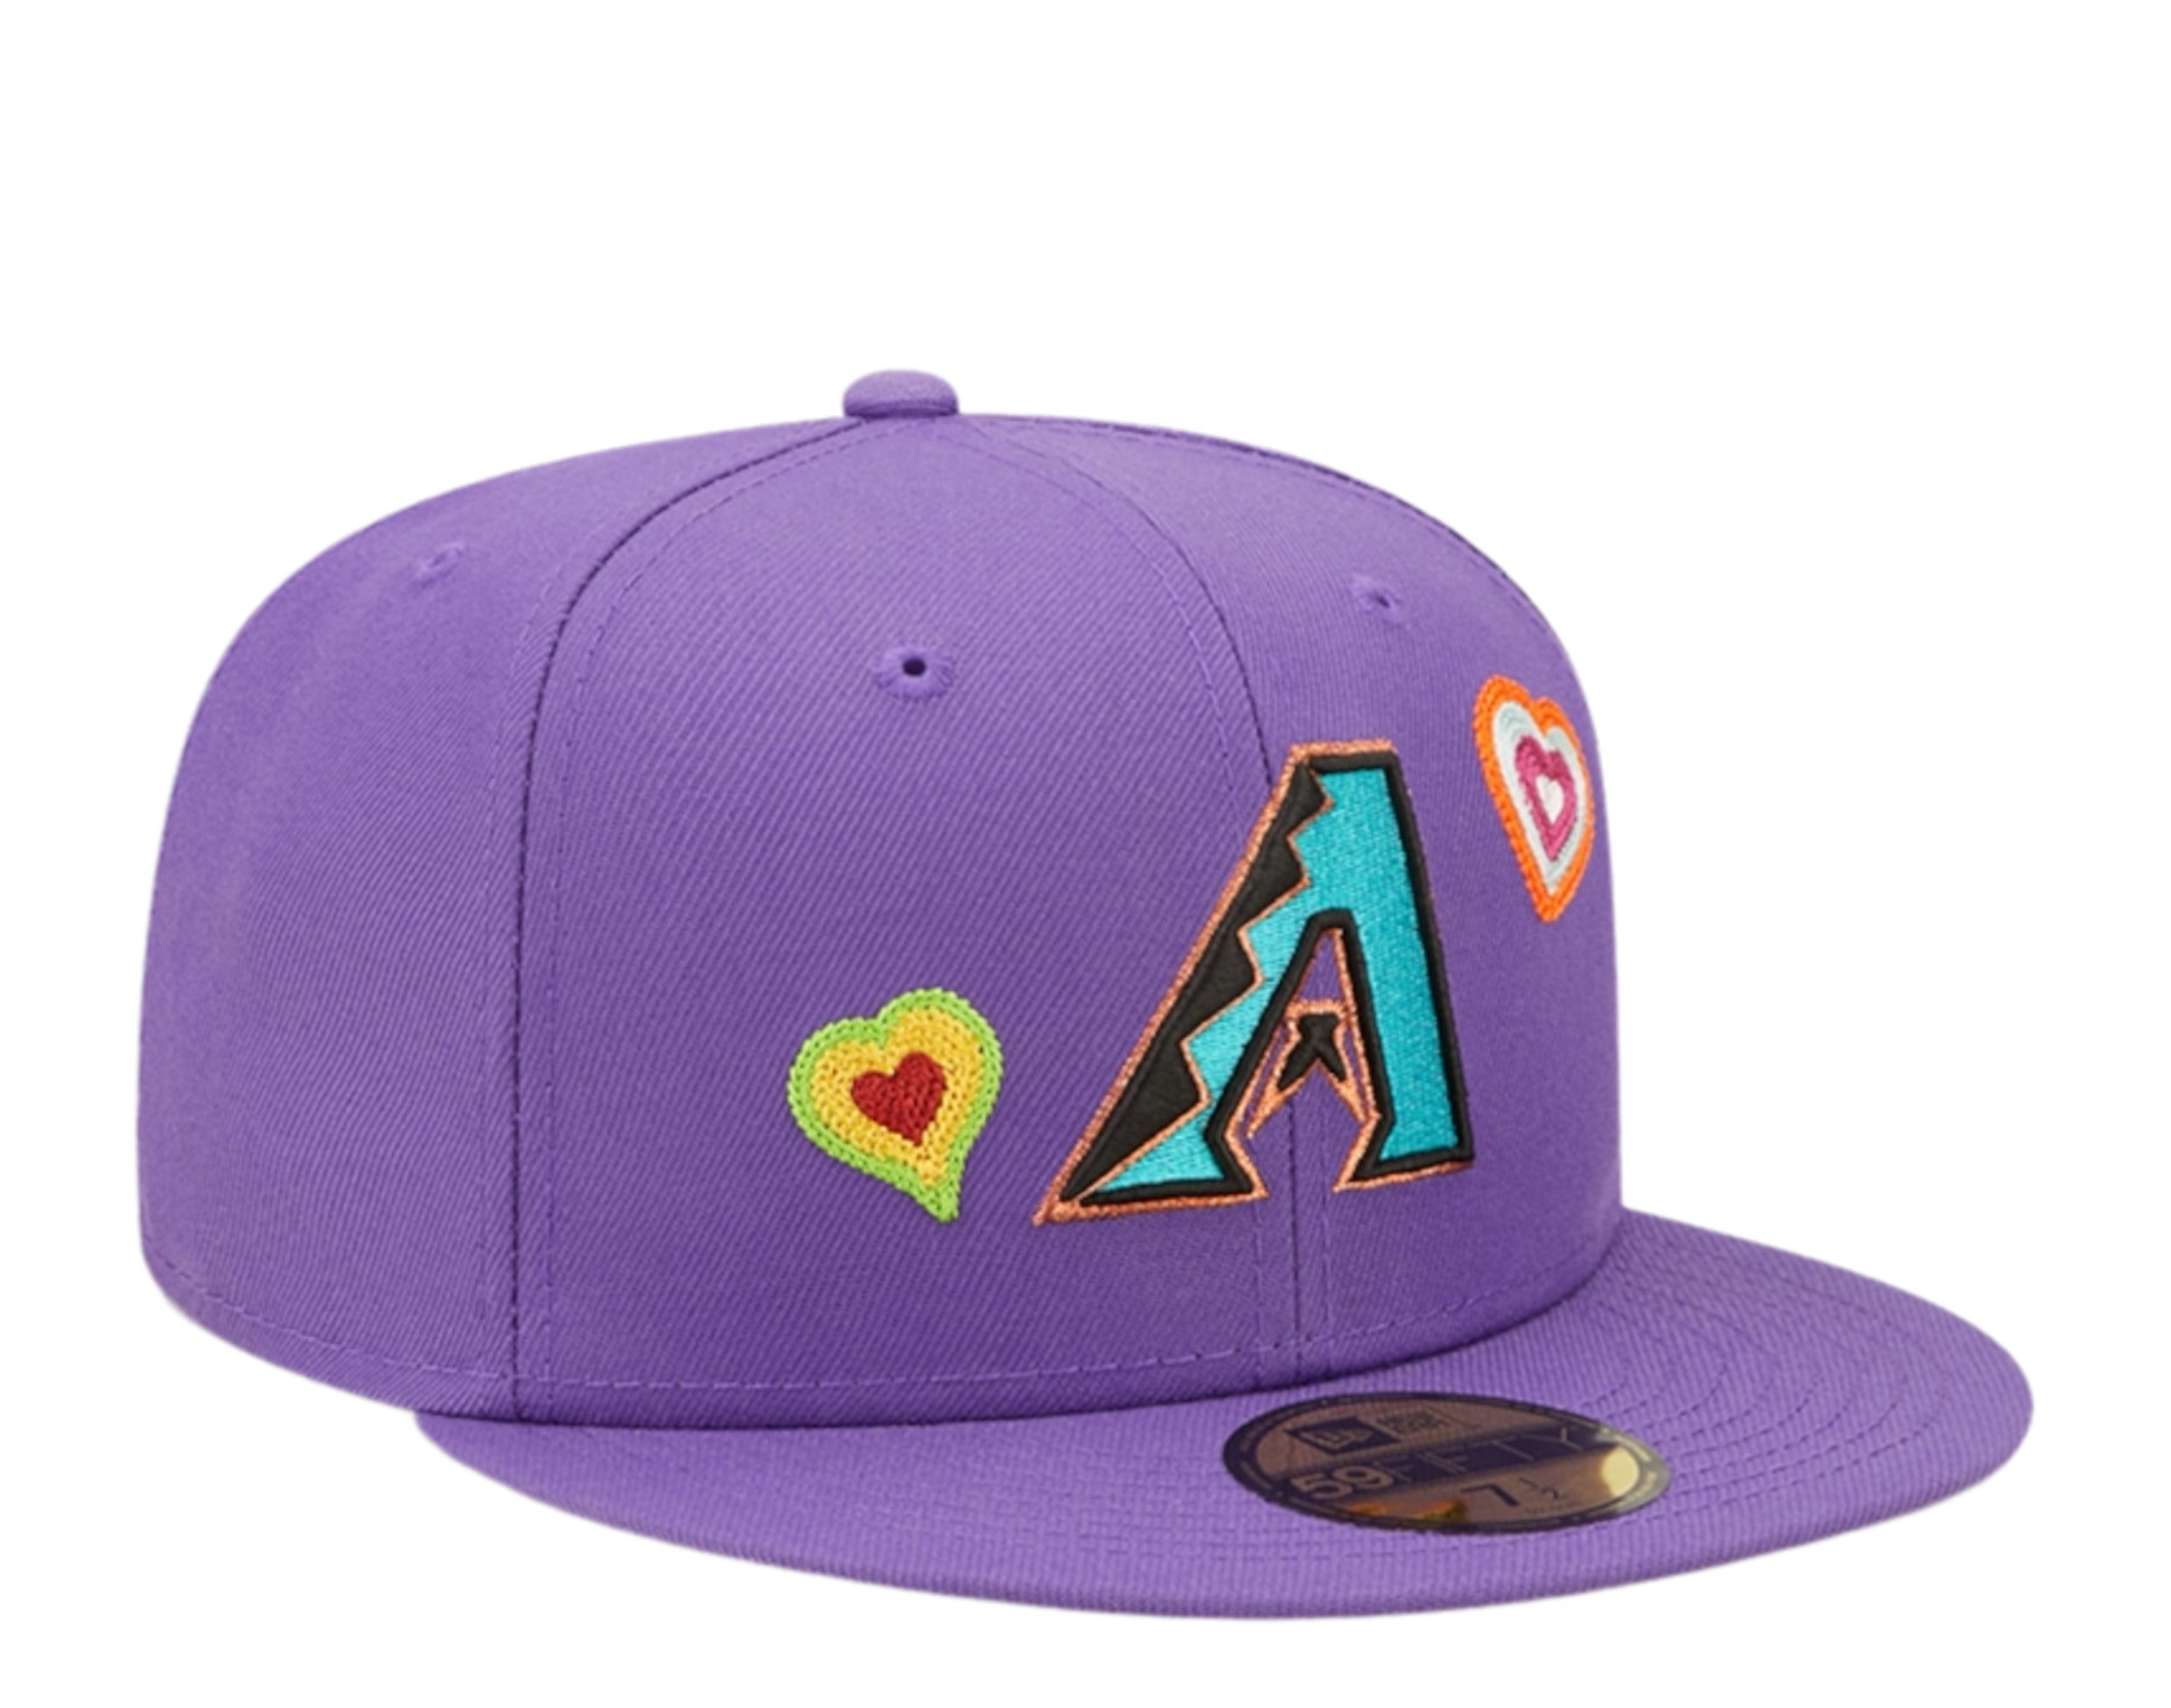 Golden State Lakers CHAIN STITCH HEARTS Black Fitted Hat